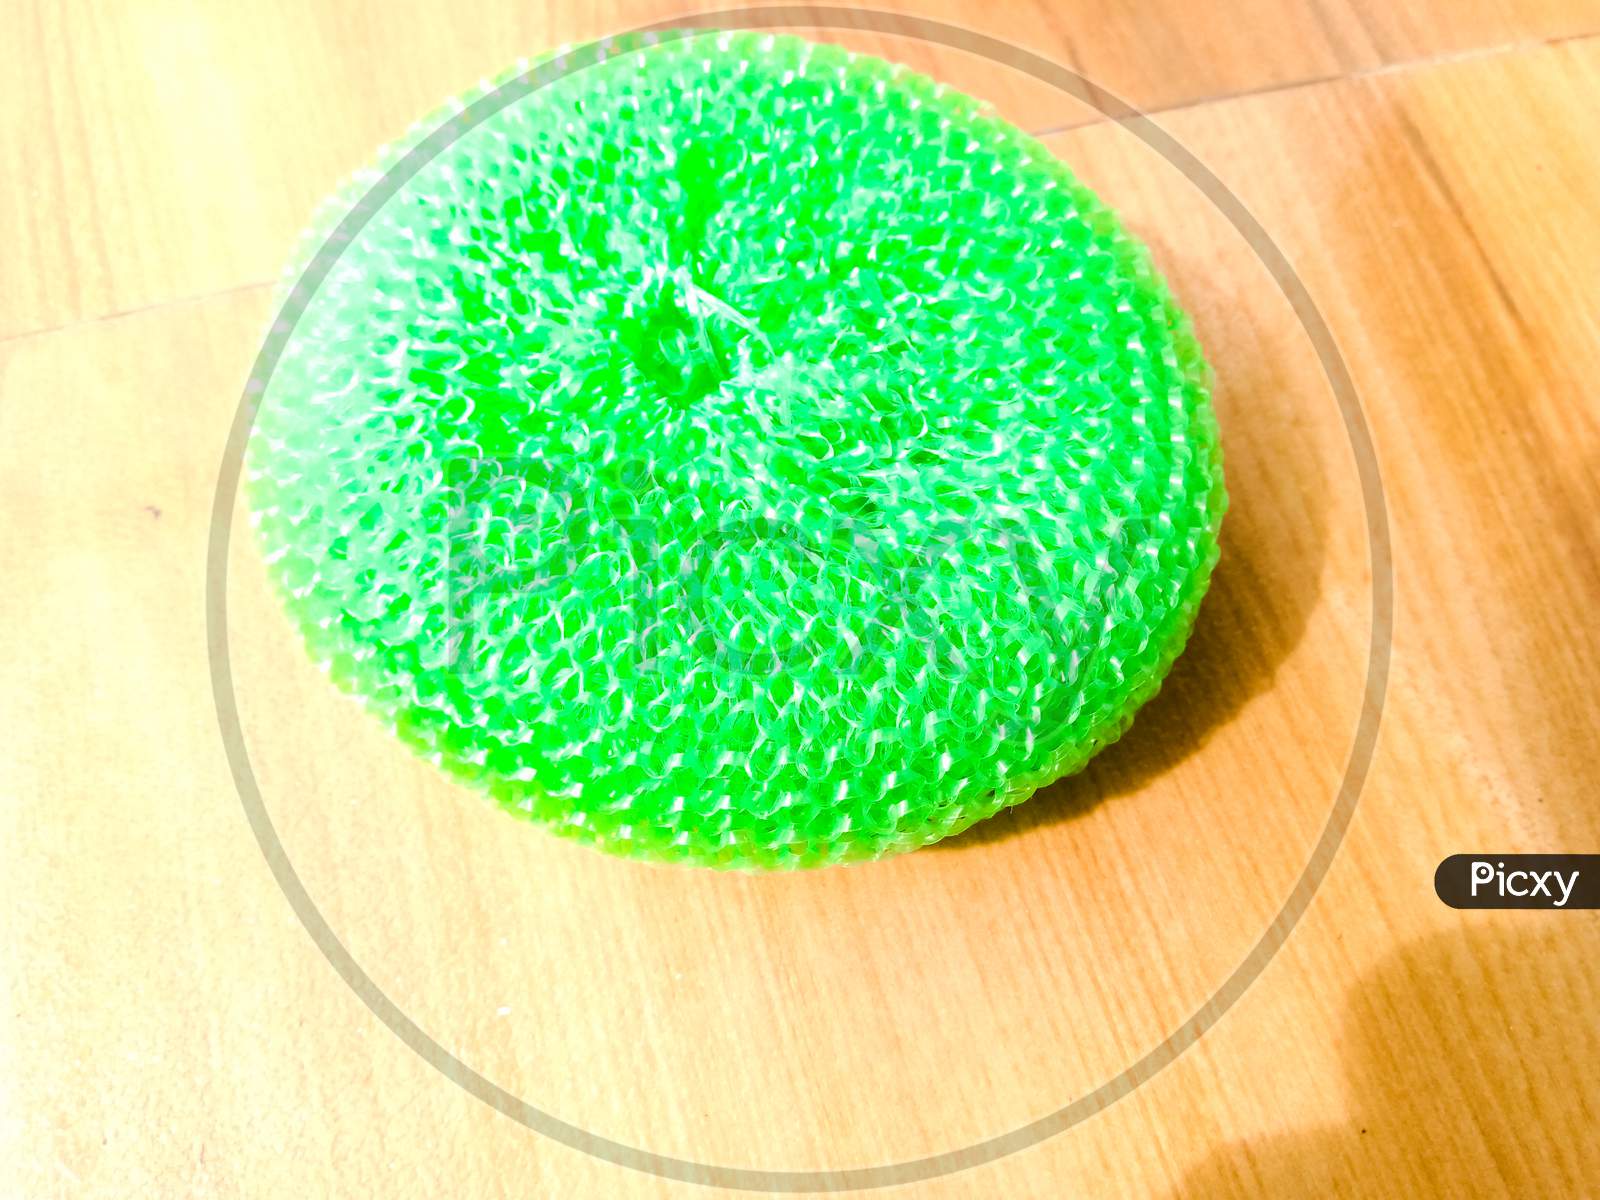 A Green Plastic Scrubber Placed On The Floor.